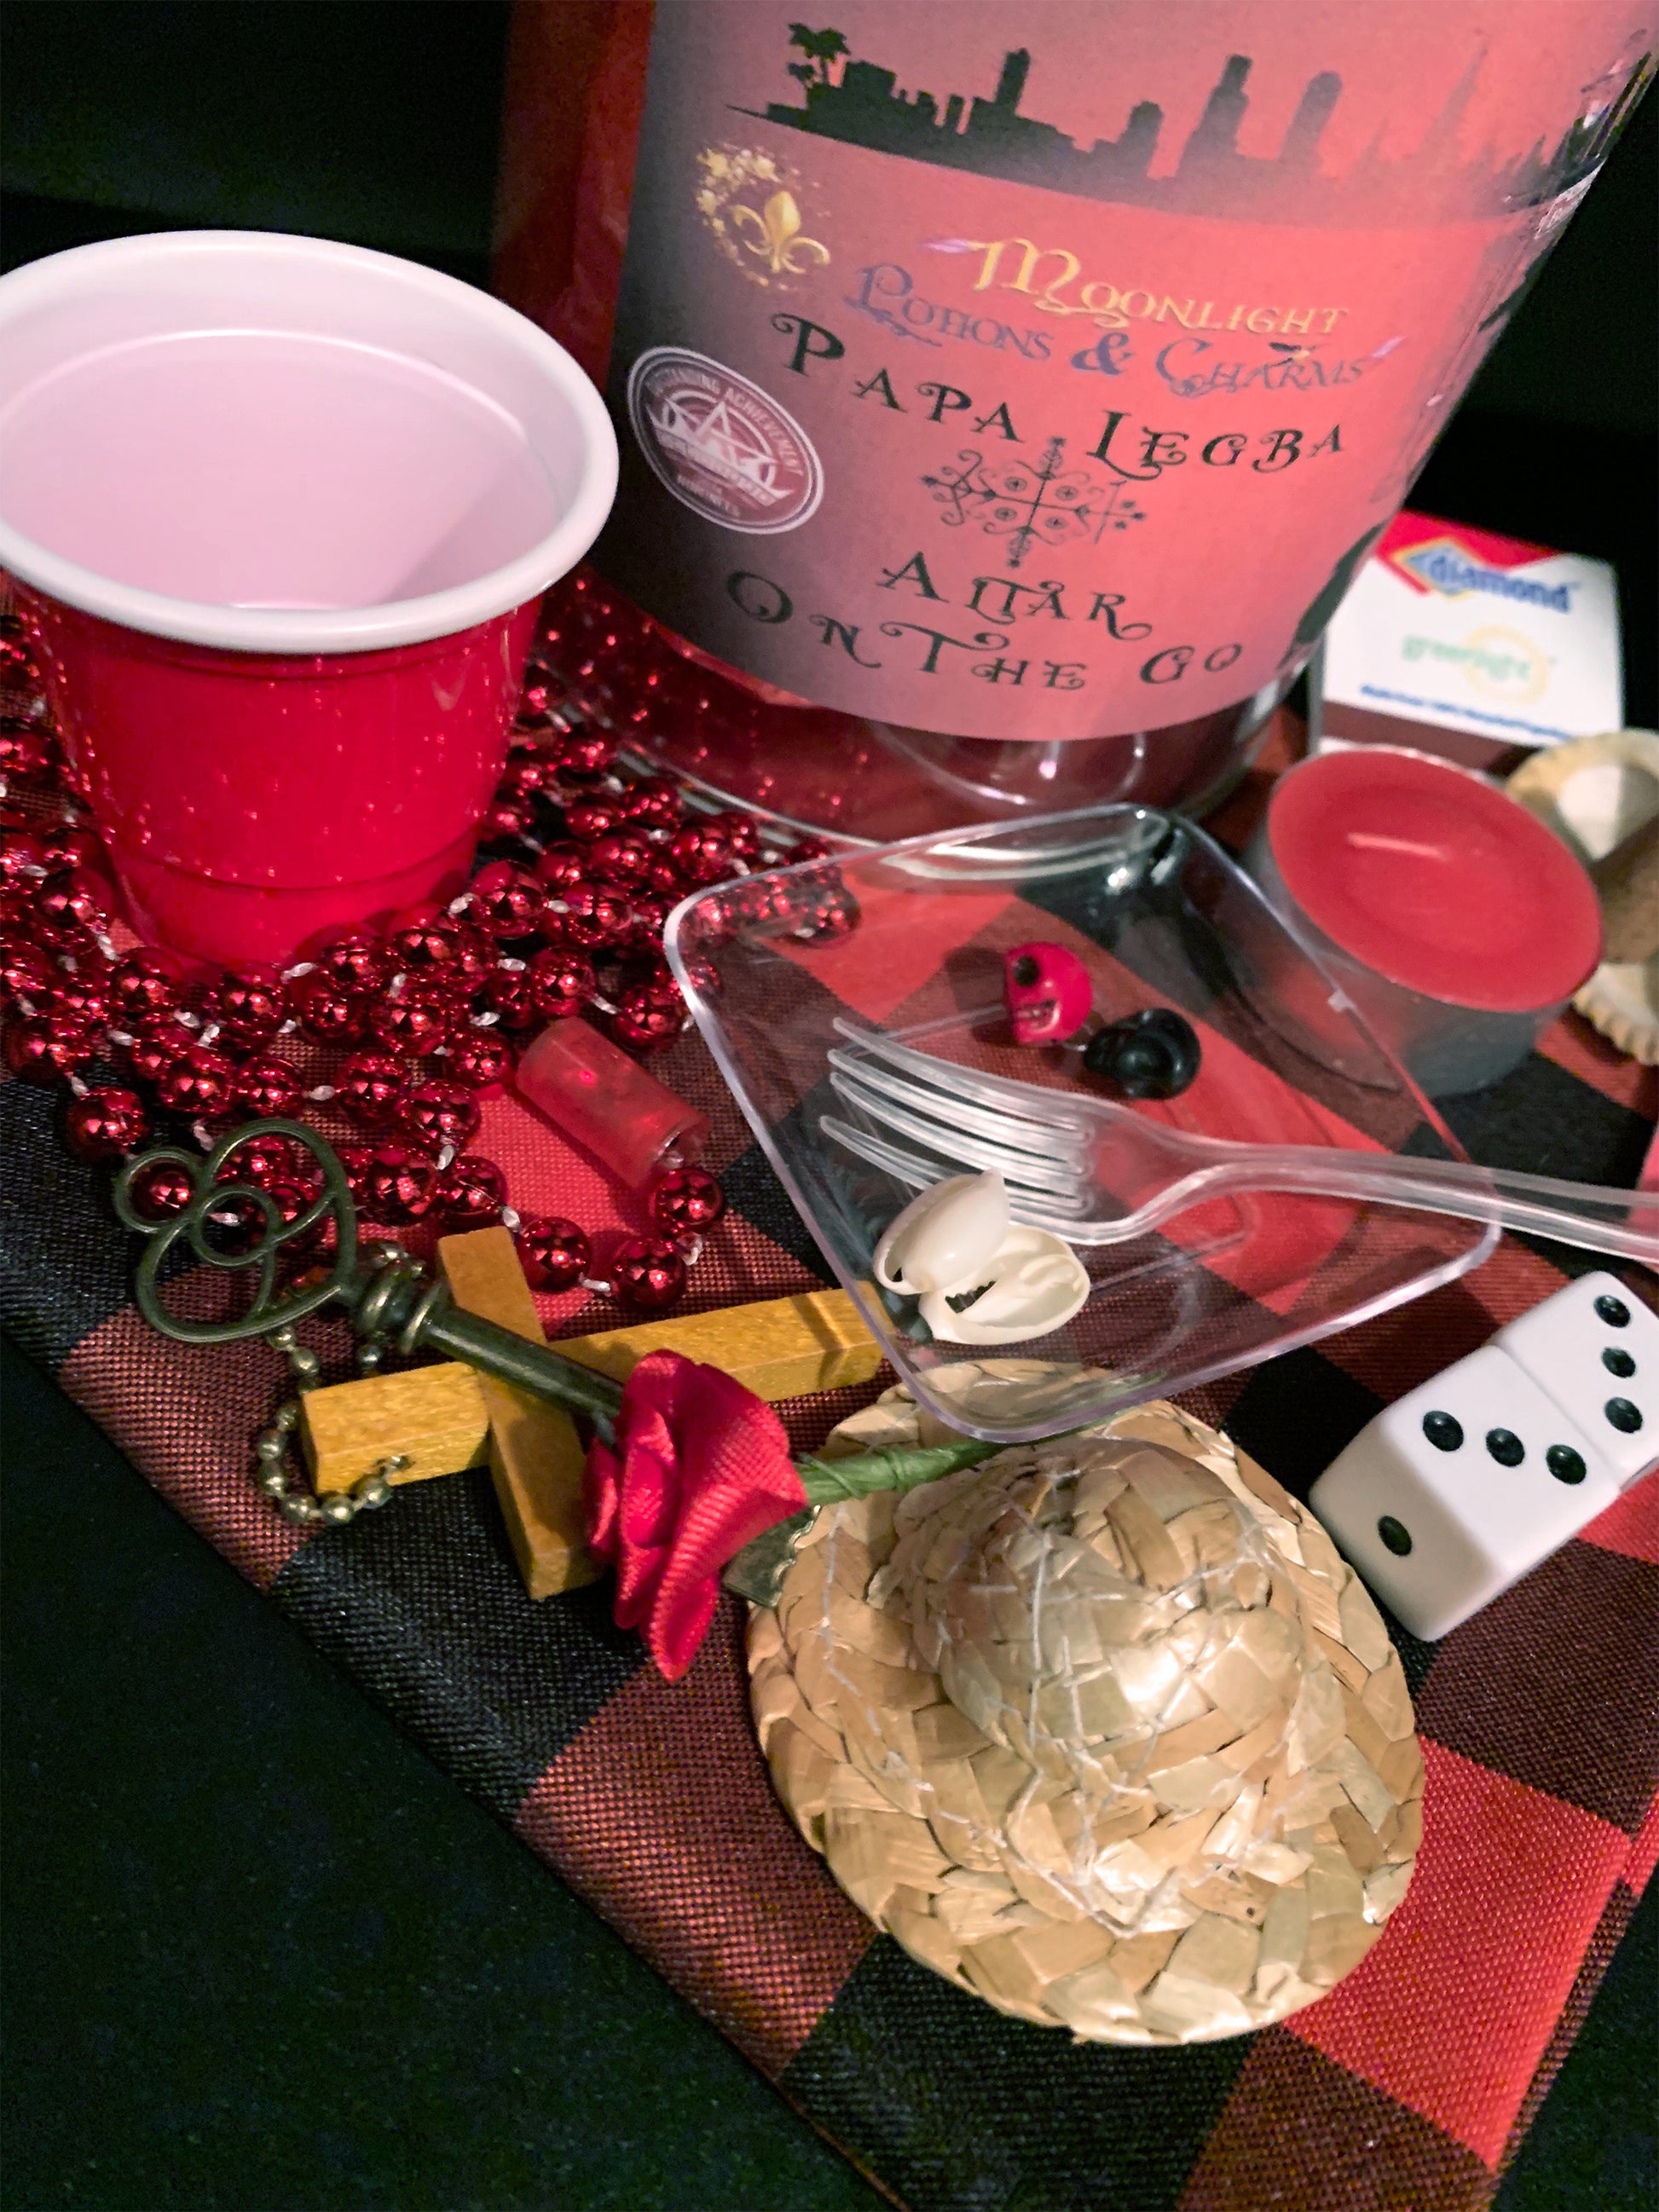 Papa Legba Altar On The Go - Moonlight Potions & Charms